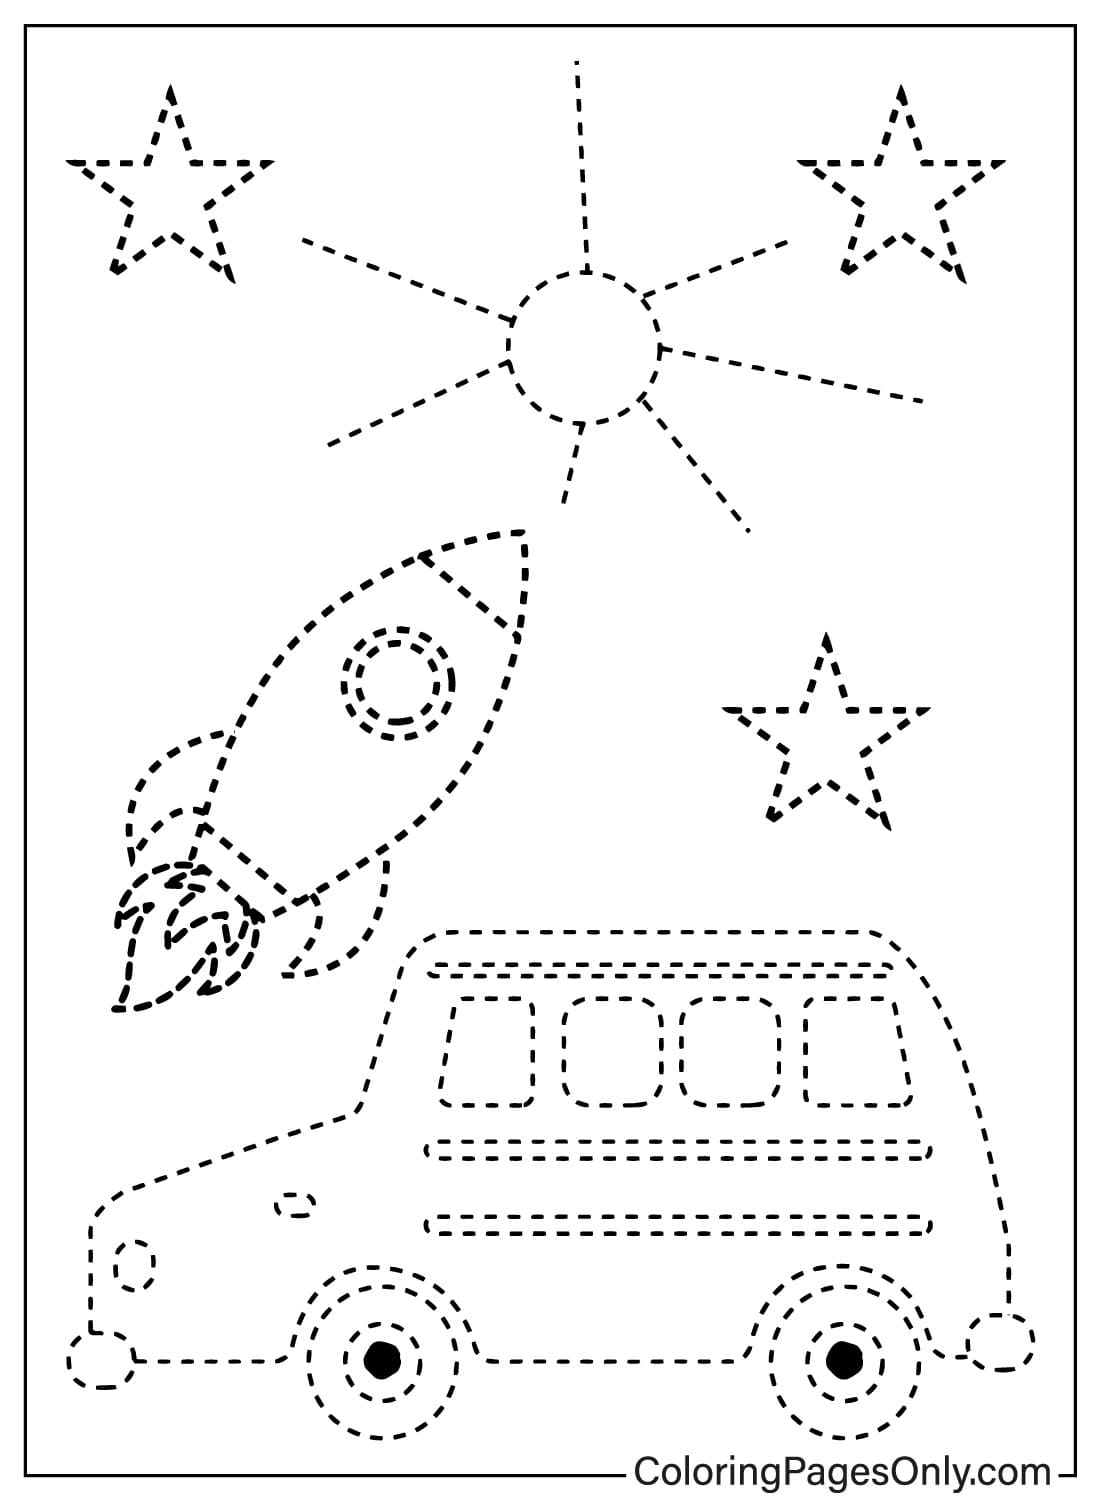 Tracing Coloring Page from Tracing